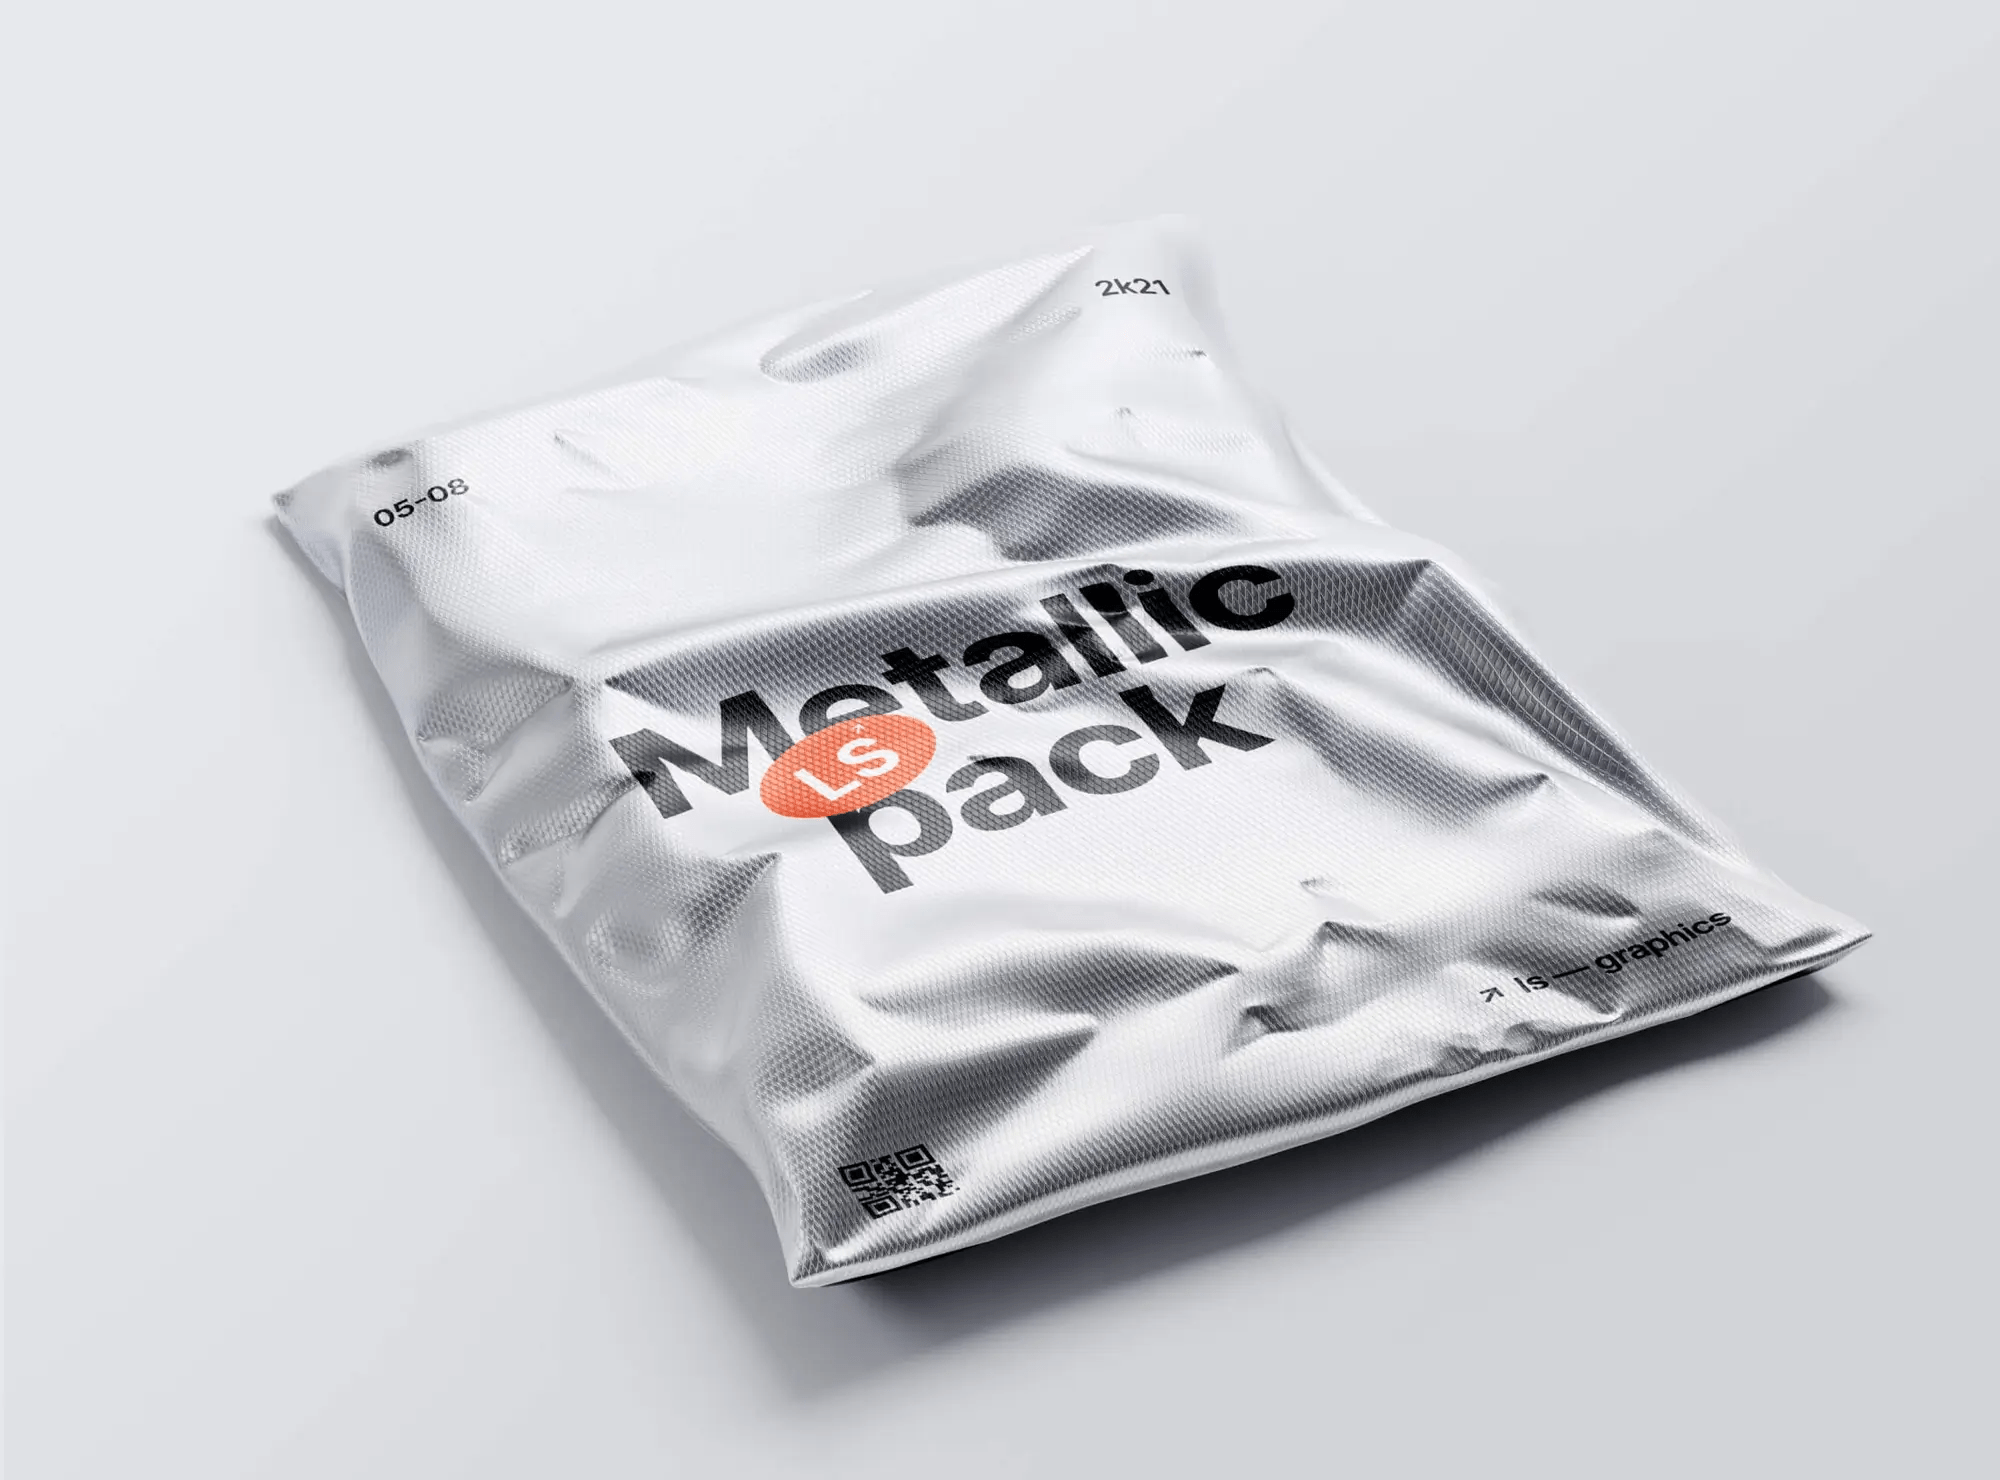 Metallic Package Mockup featuring a high-end design presentation